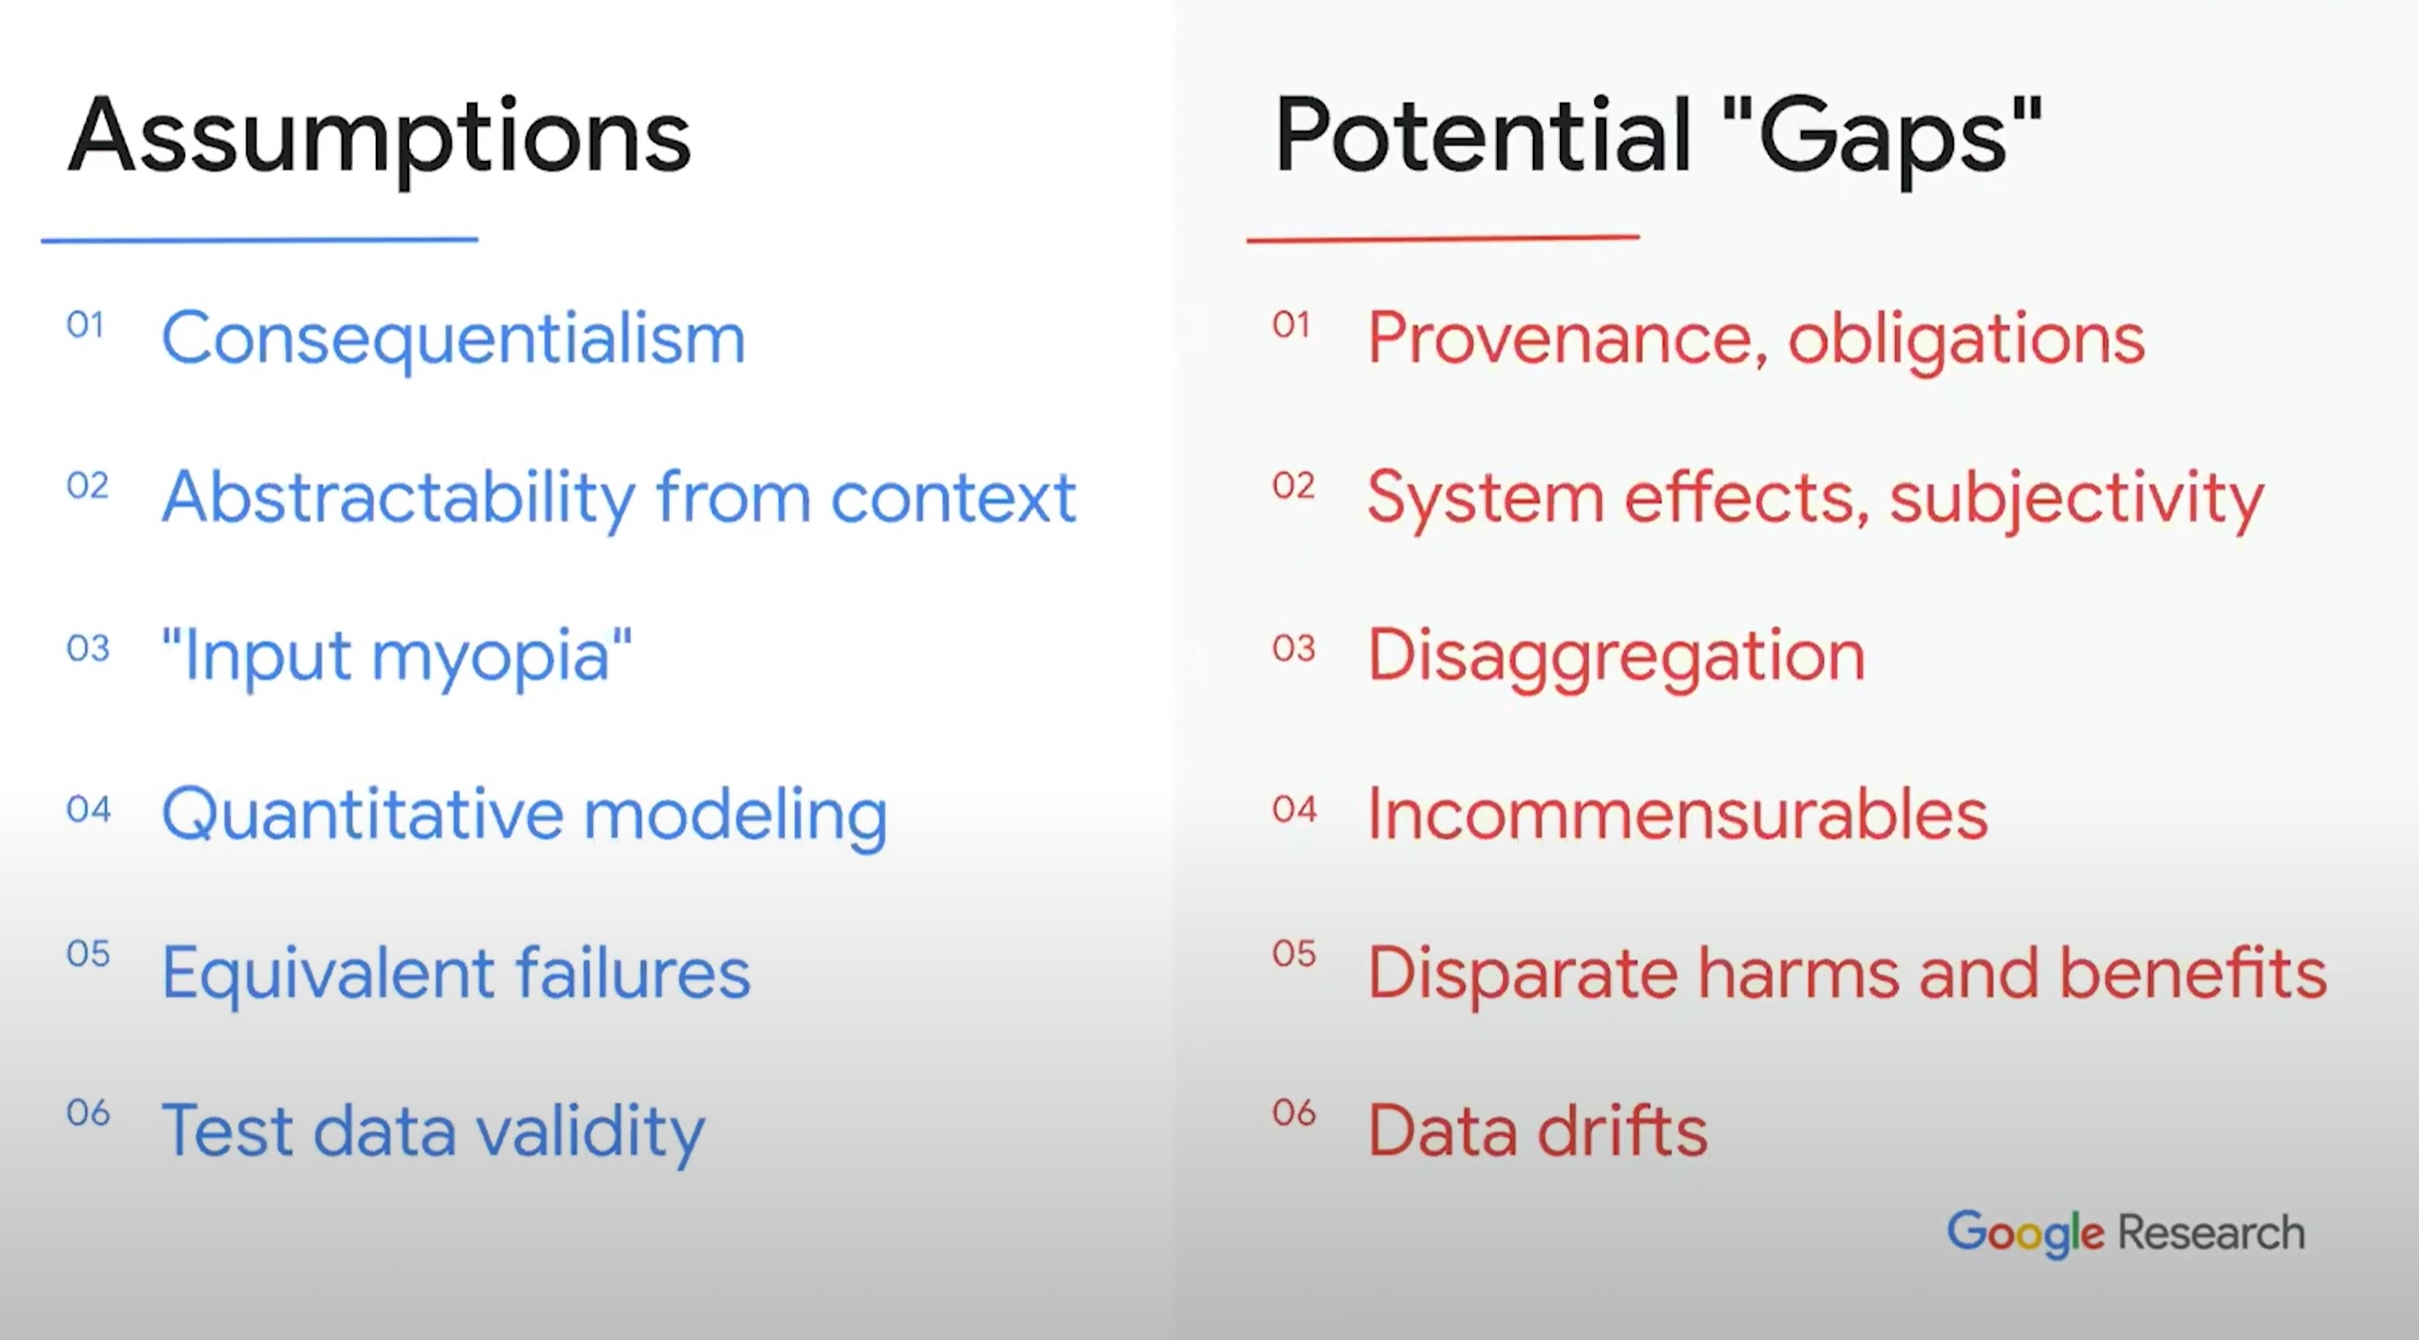 Often unspoken assumptions underlying machine learning evaluation practices, and the gaps left by each